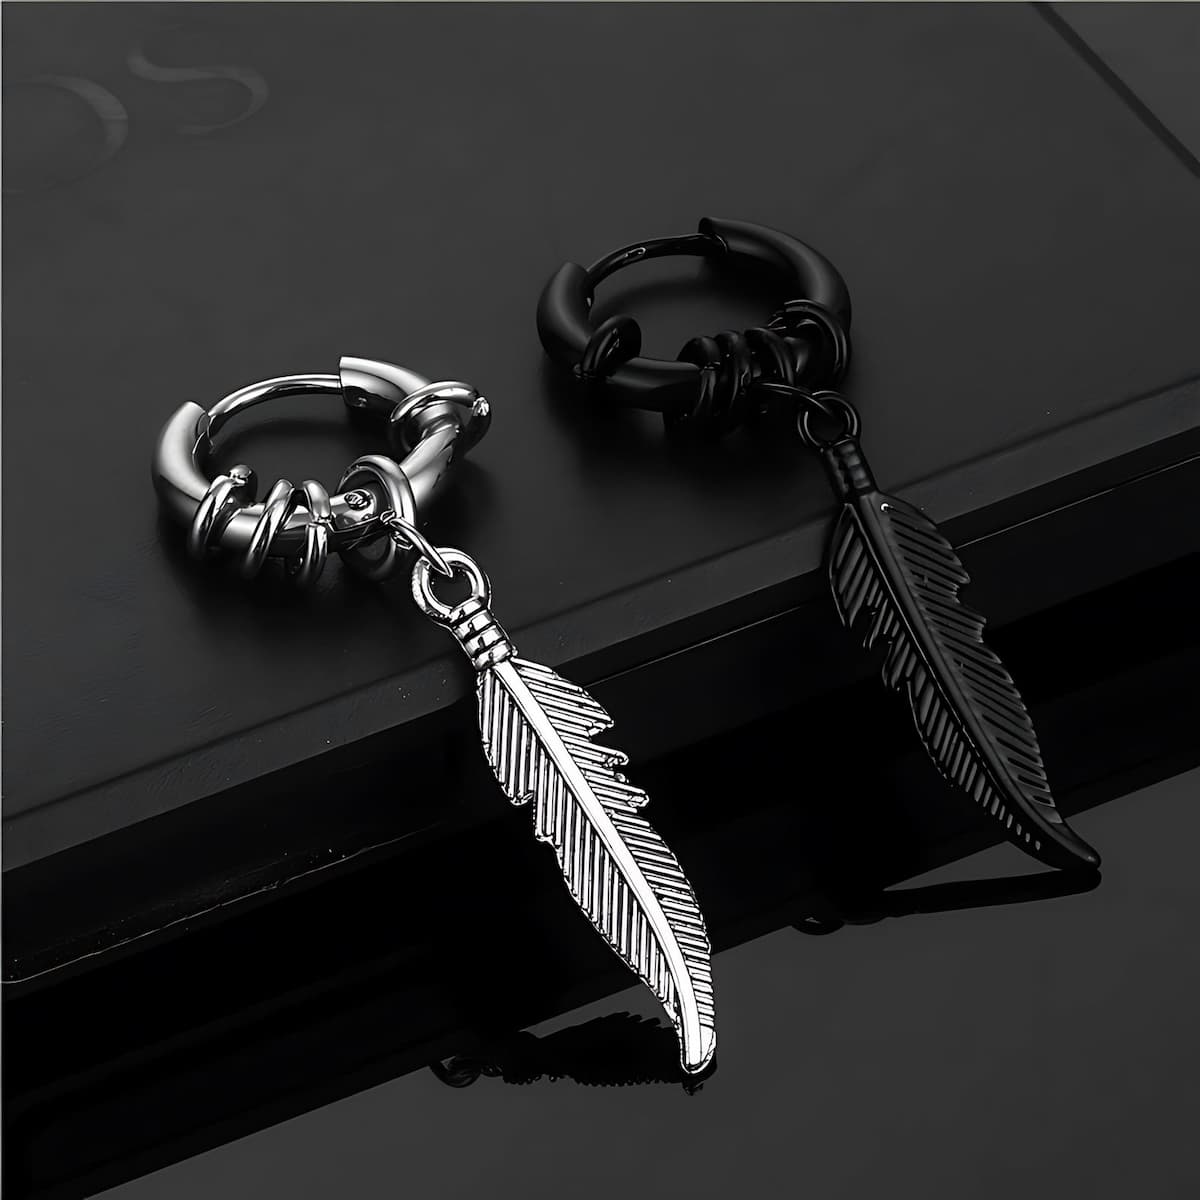 Stainless Steel Feather Earrings Black and Silver Xenos Jewelry